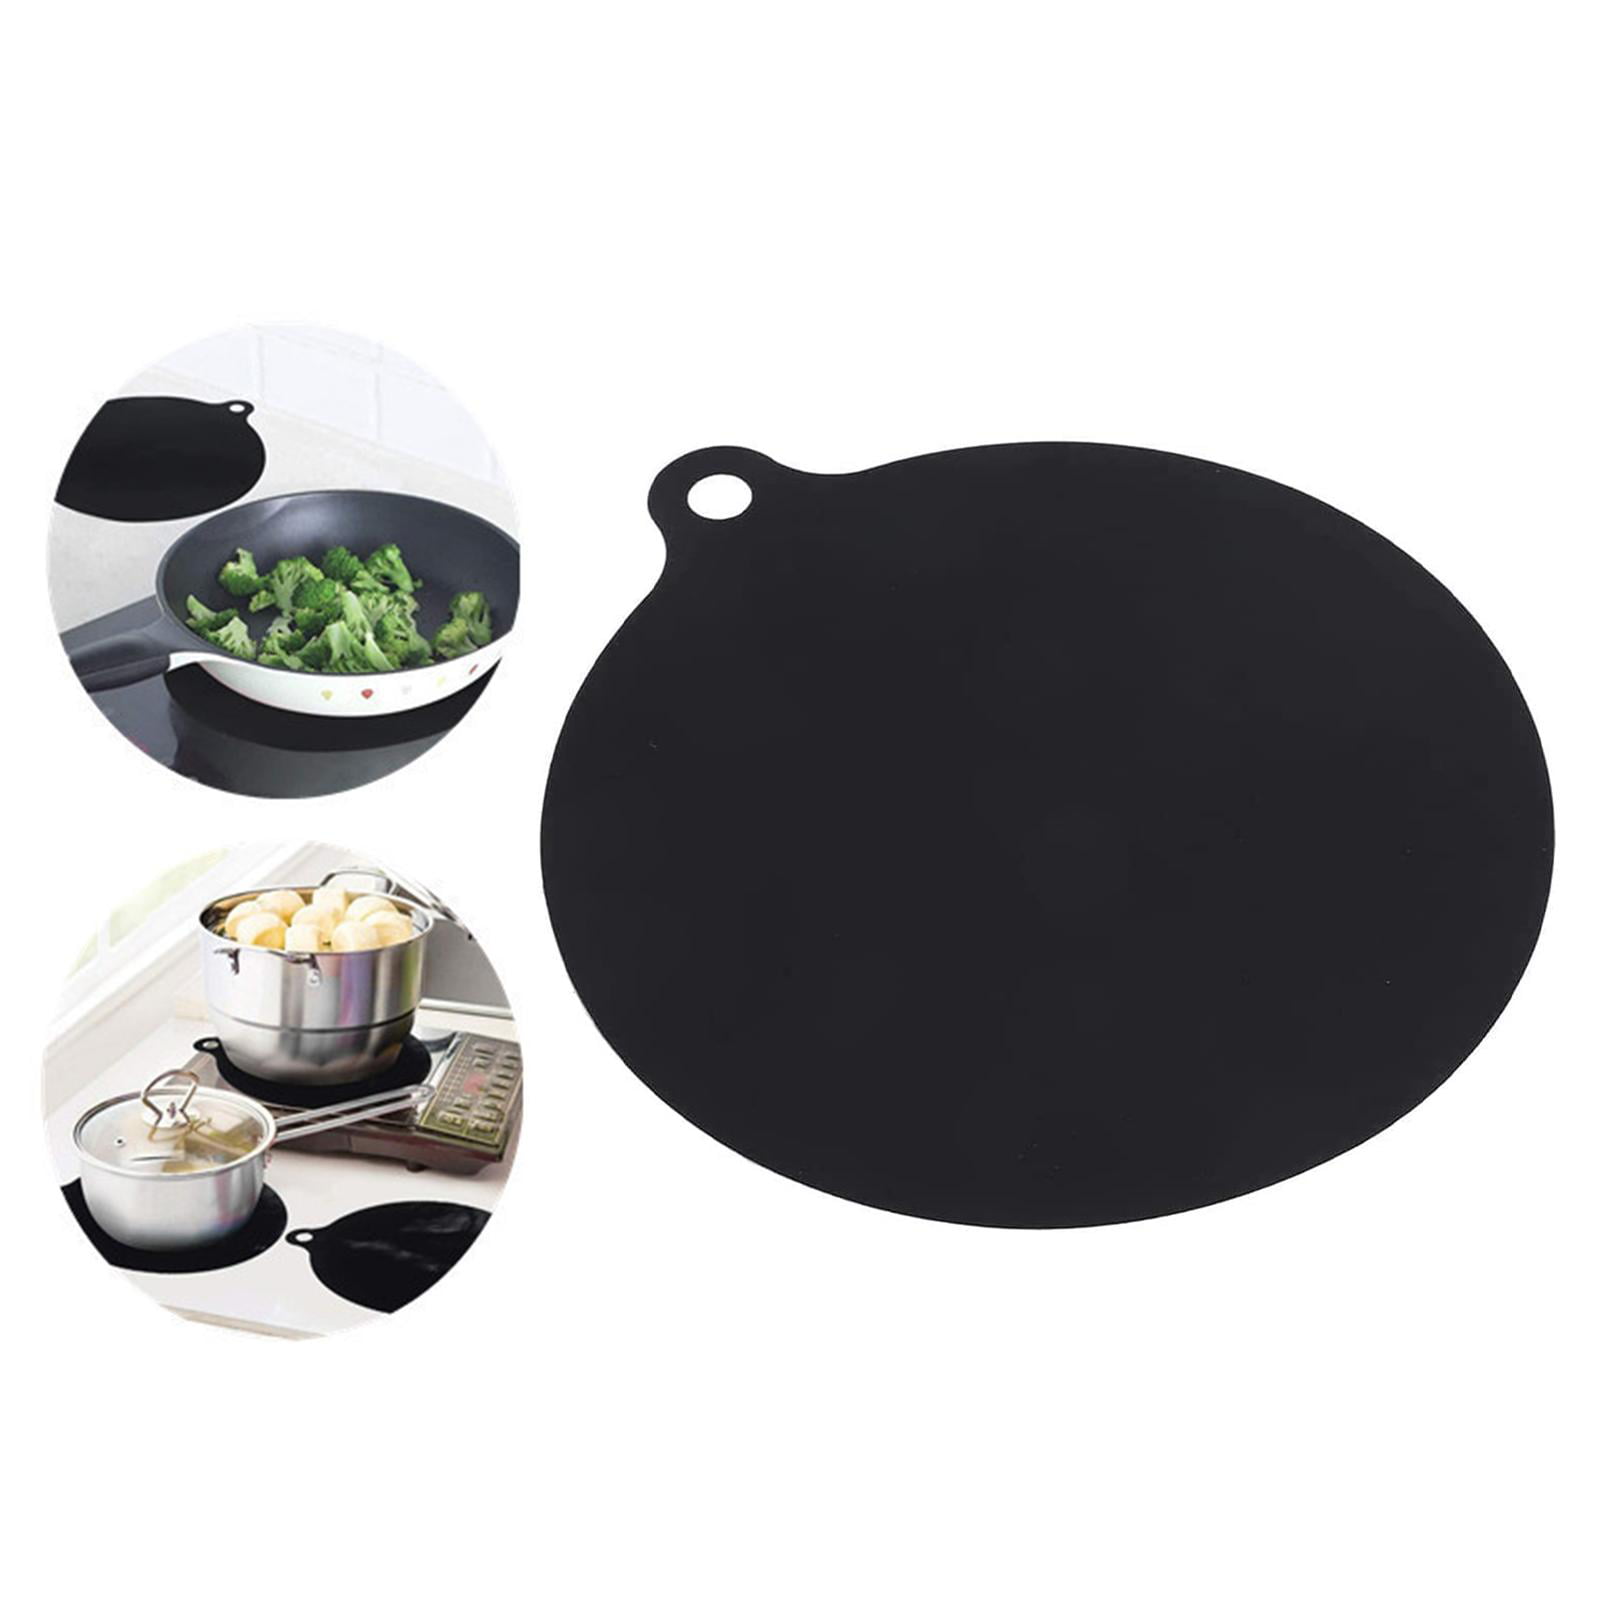 Sagit Translucent Food Silicone Mat Silicone Induction Cooker